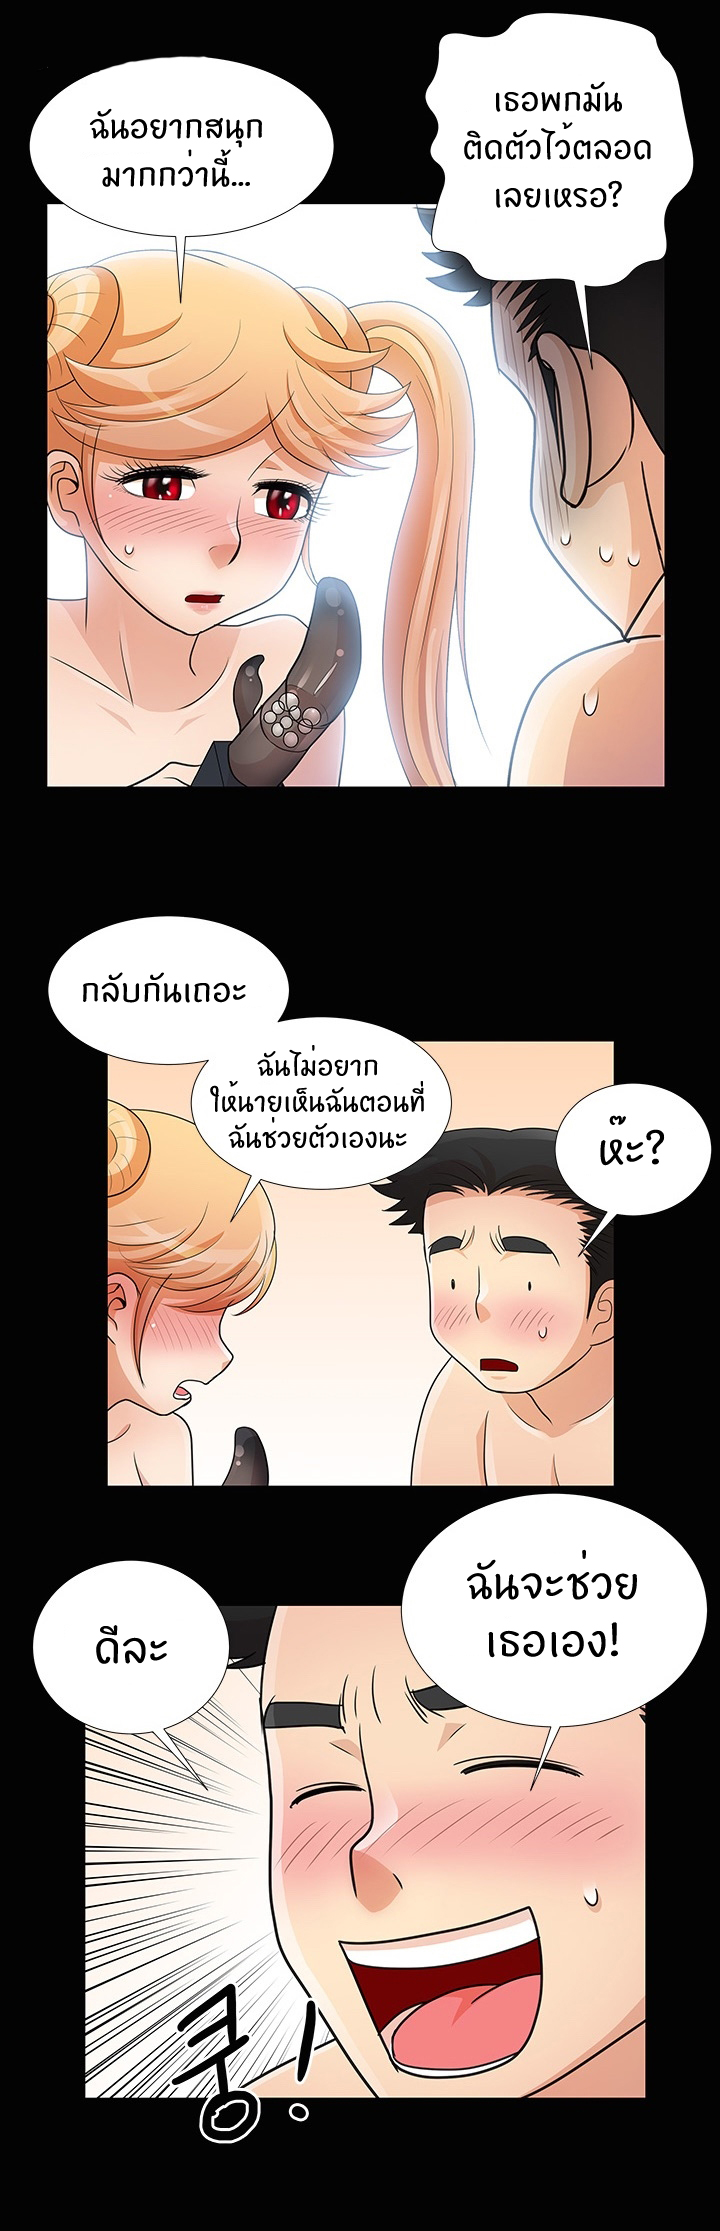 Will You Do as I Say? - หน้า 16